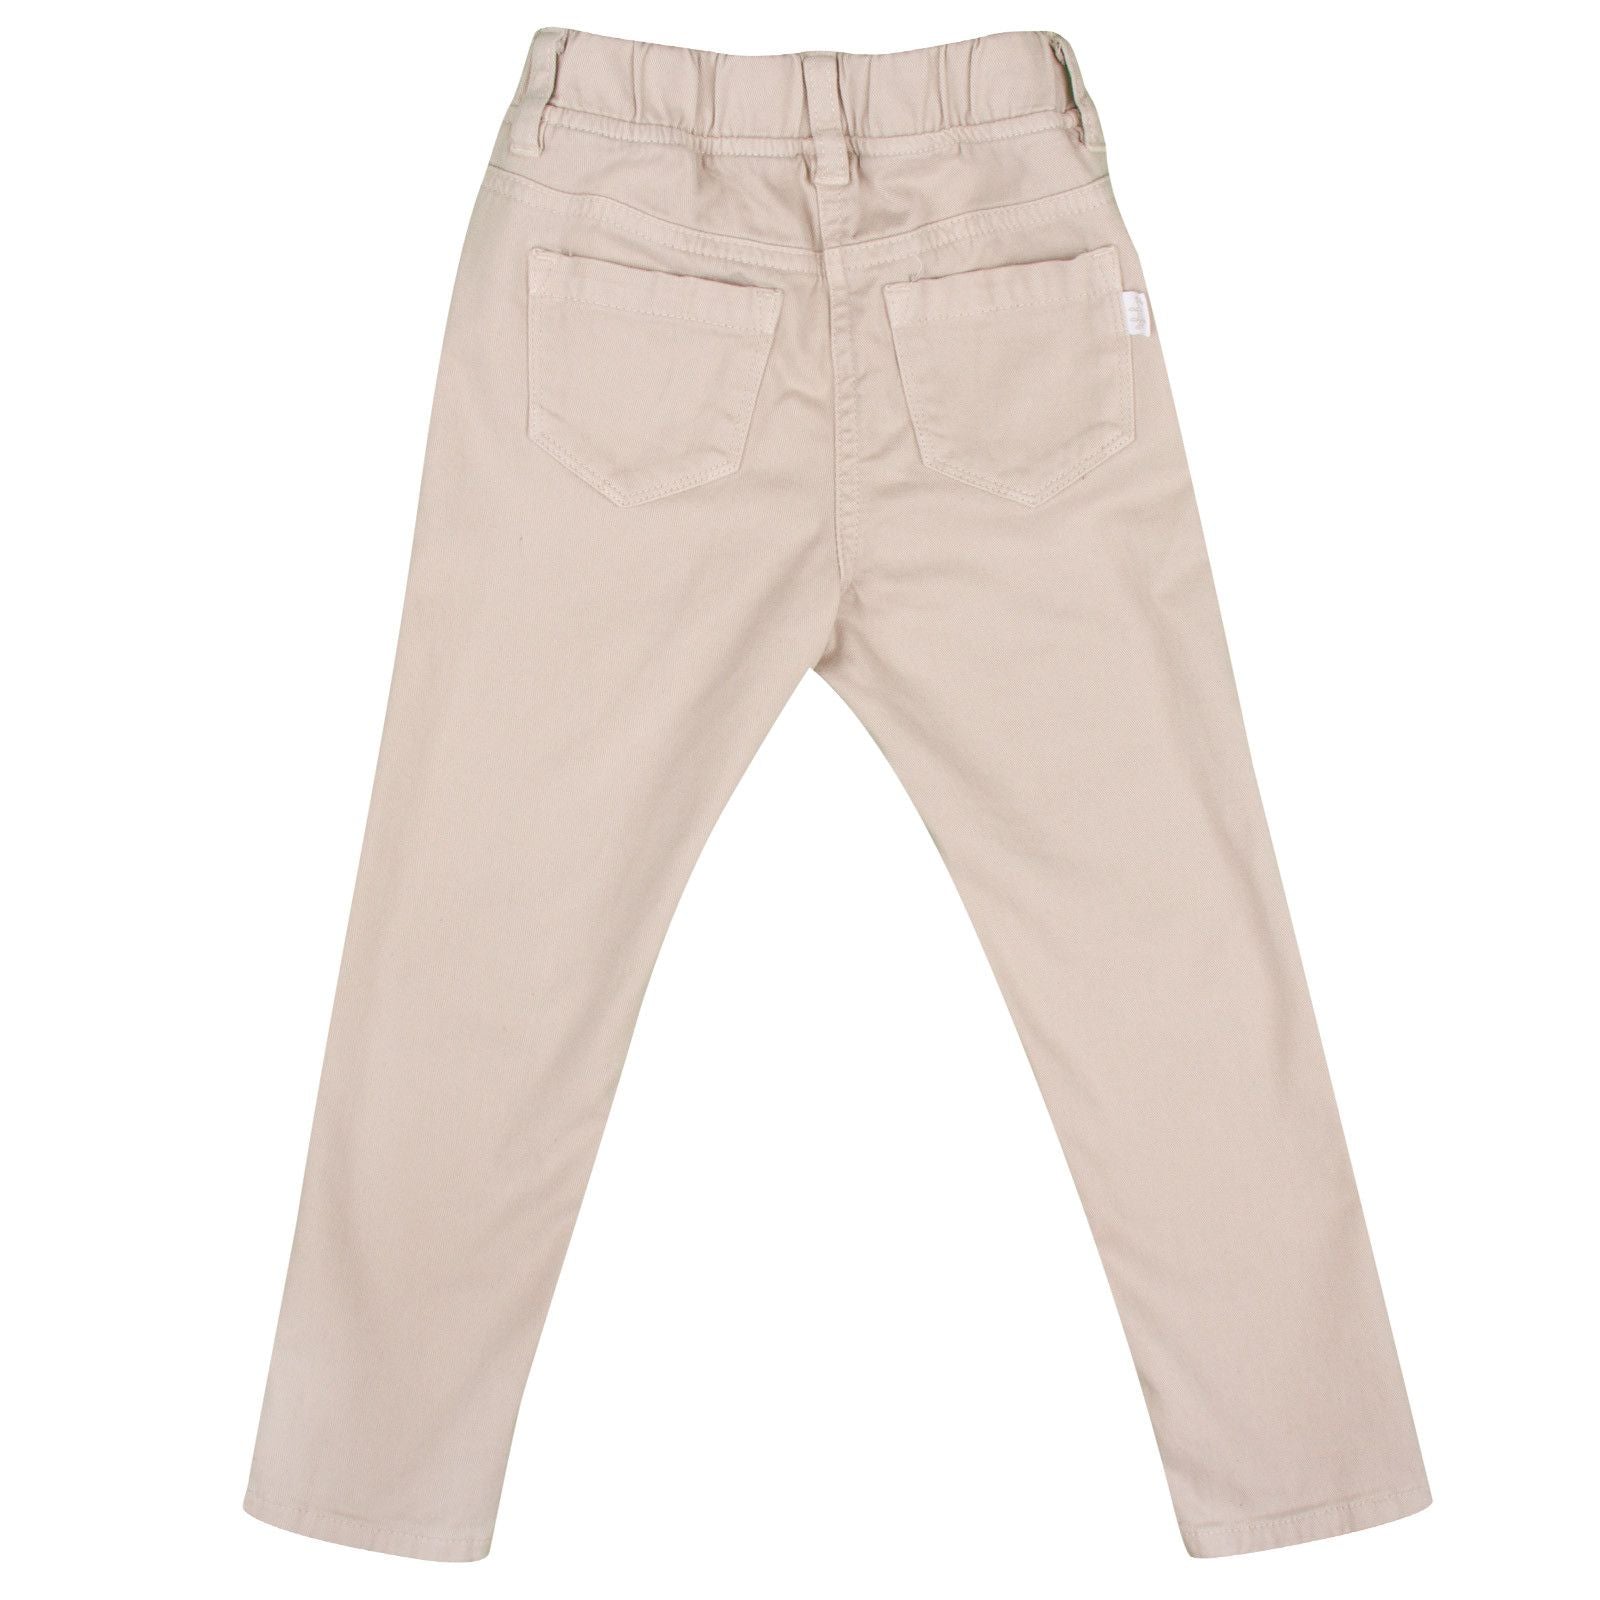 Girls Beige Ribbed Cotton Trousers - CÉMAROSE | Children's Fashion Store - 2